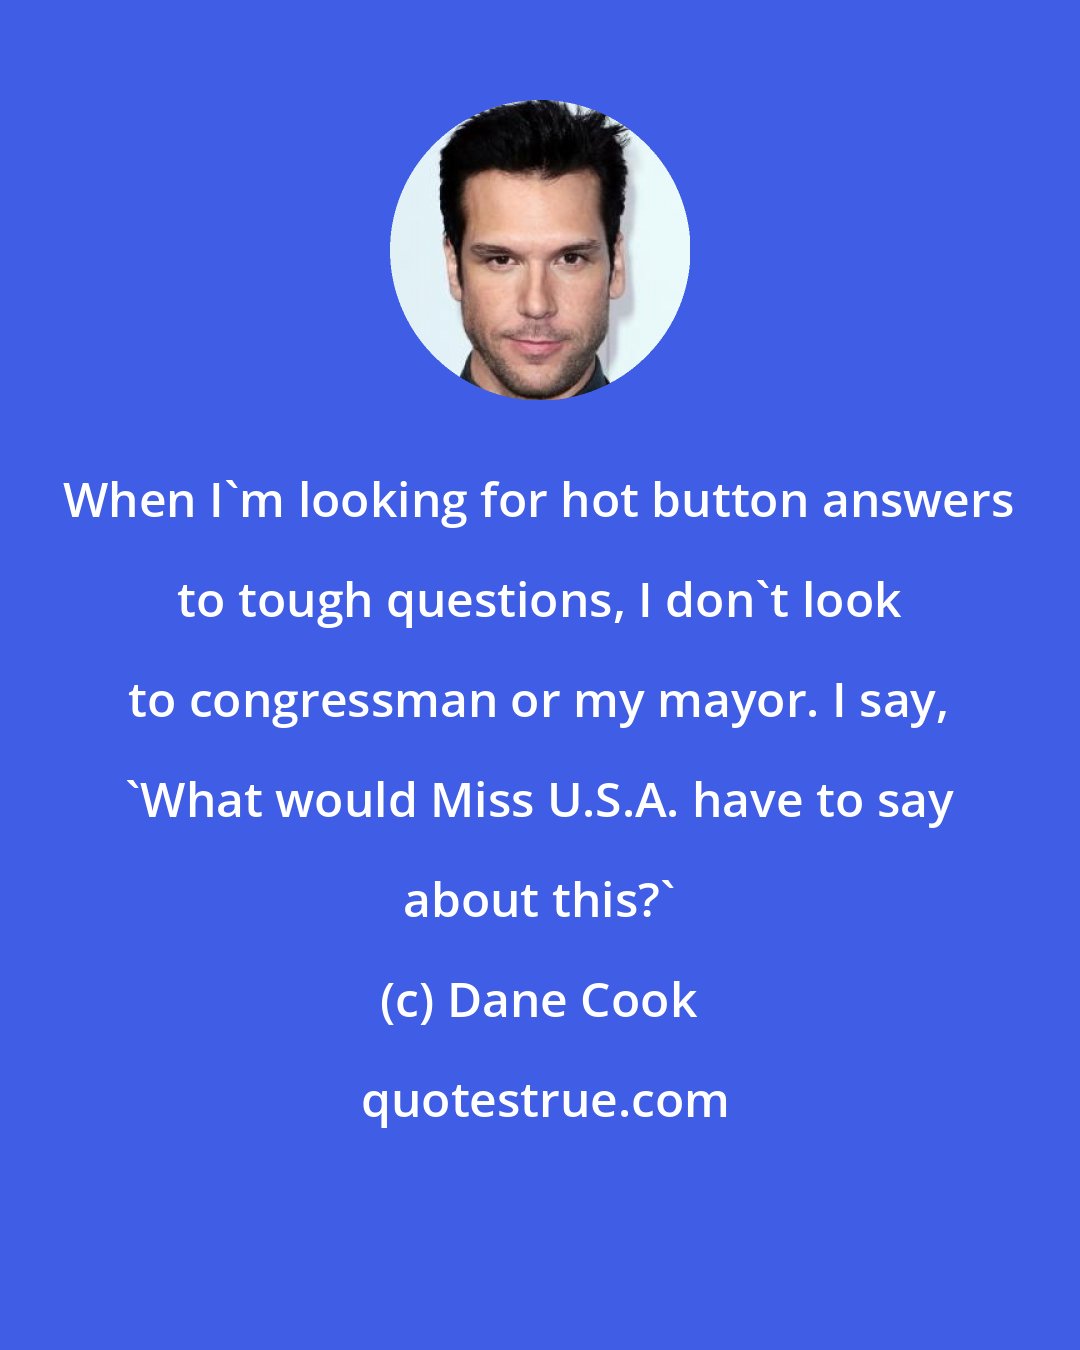 Dane Cook: When I'm looking for hot button answers to tough questions, I don't look to congressman or my mayor. I say, 'What would Miss U.S.A. have to say about this?'